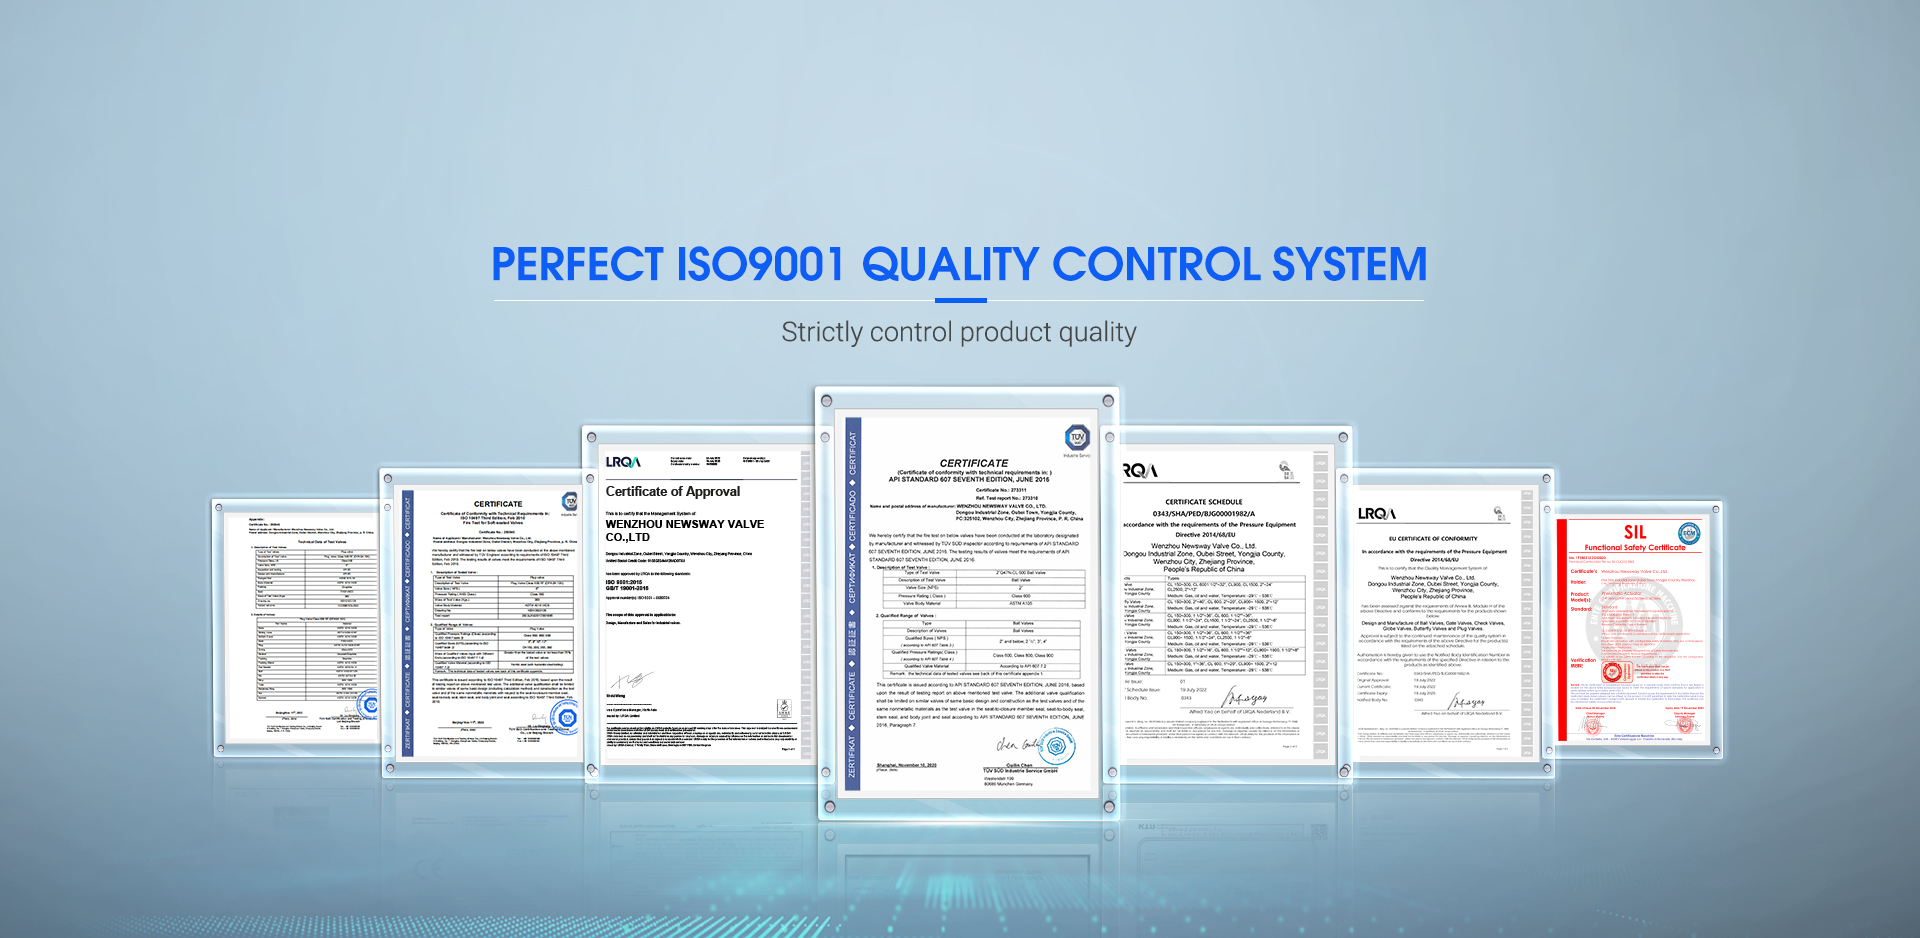 PERFECT ISO9001 QUALITY CONTROL SYSTEM